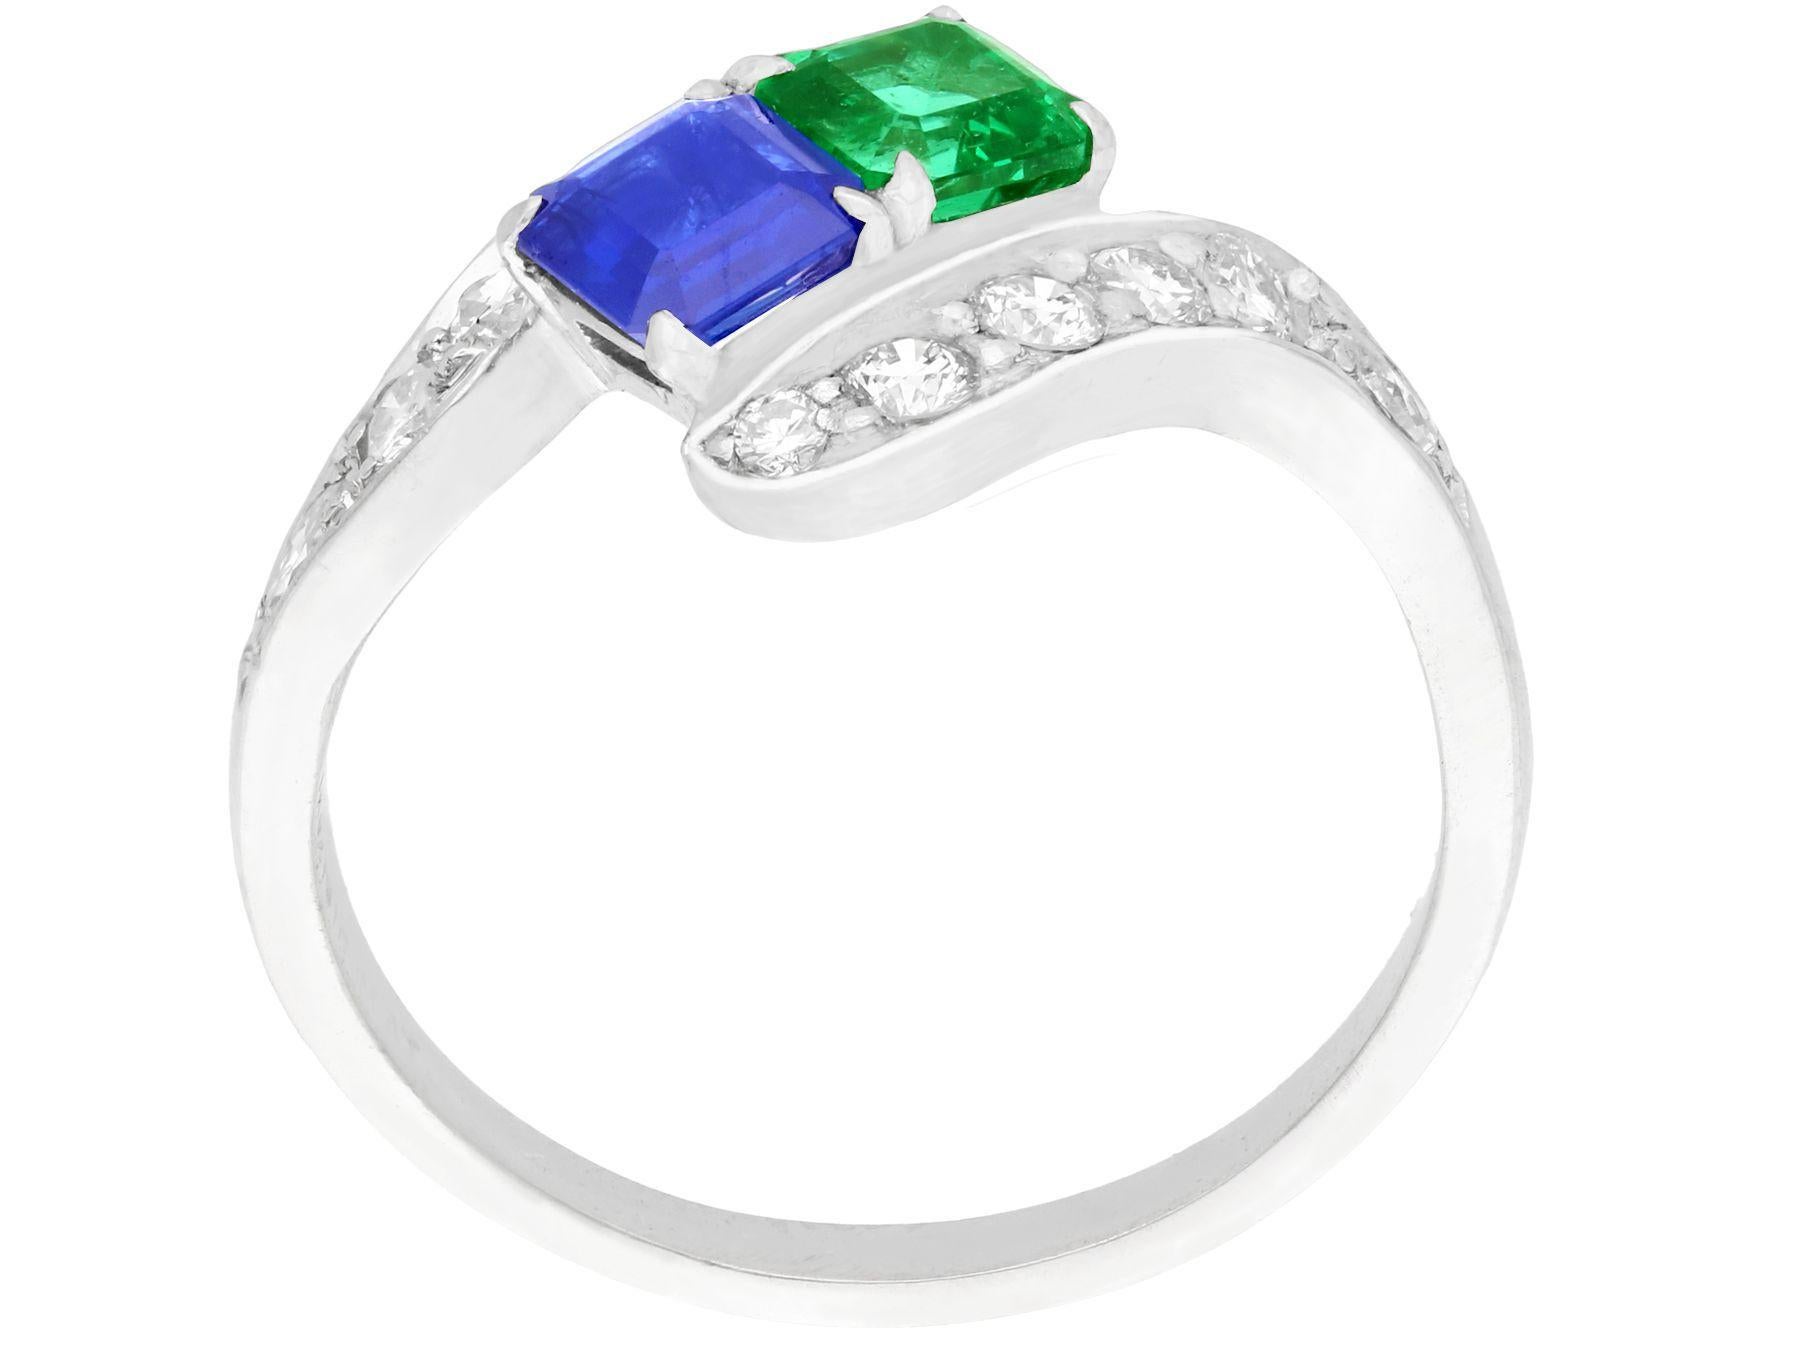 Men's Vintage 1950s Sapphire and Emerald Diamond and Platinum Twist Ring For Sale